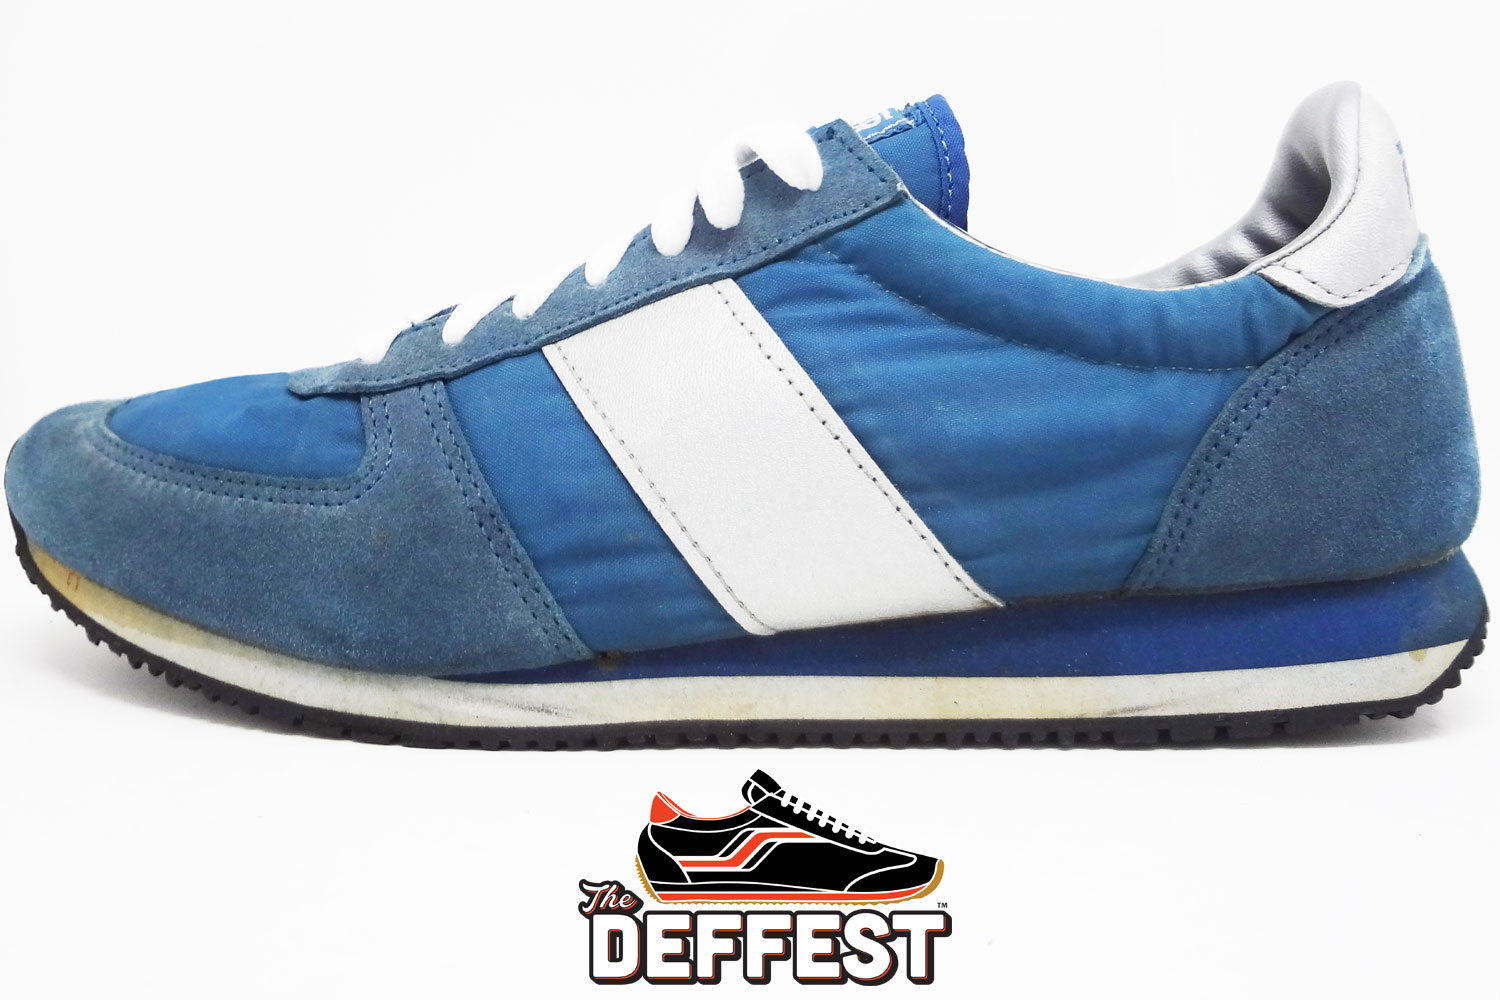 reagere Vanding vitamin vintage sneakers — The Deffest®. A vintage and retro sneaker blog. —  Starker 70s 80s rare vintage sneakers